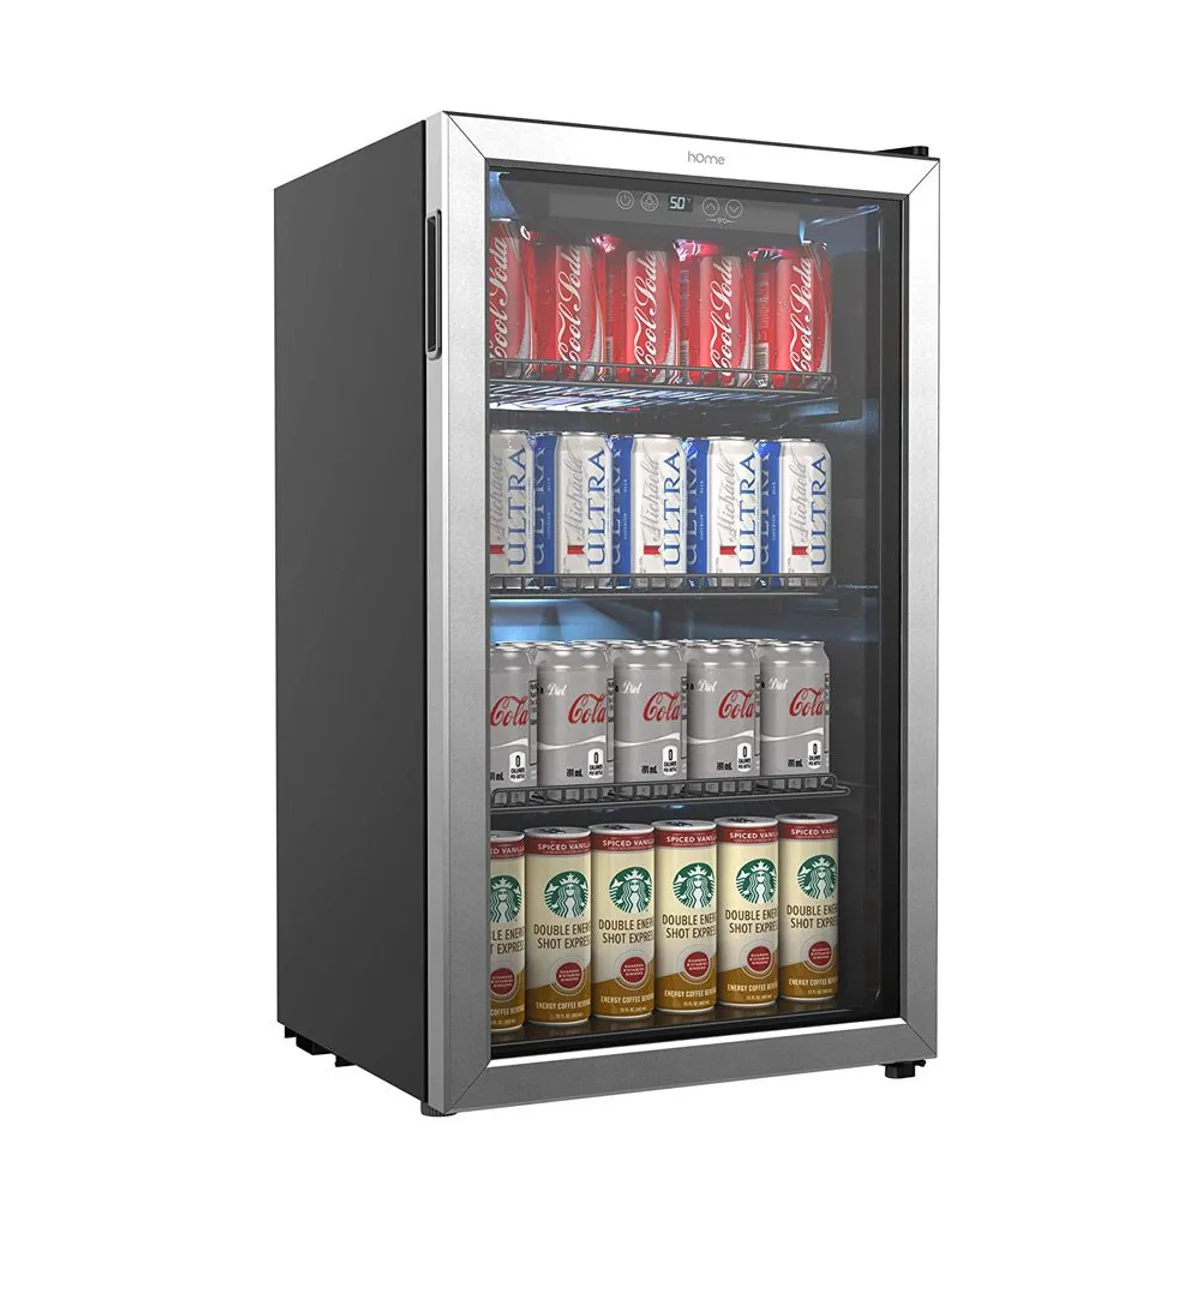 hOmeLabs 120 Can Beverage Refrigerator review